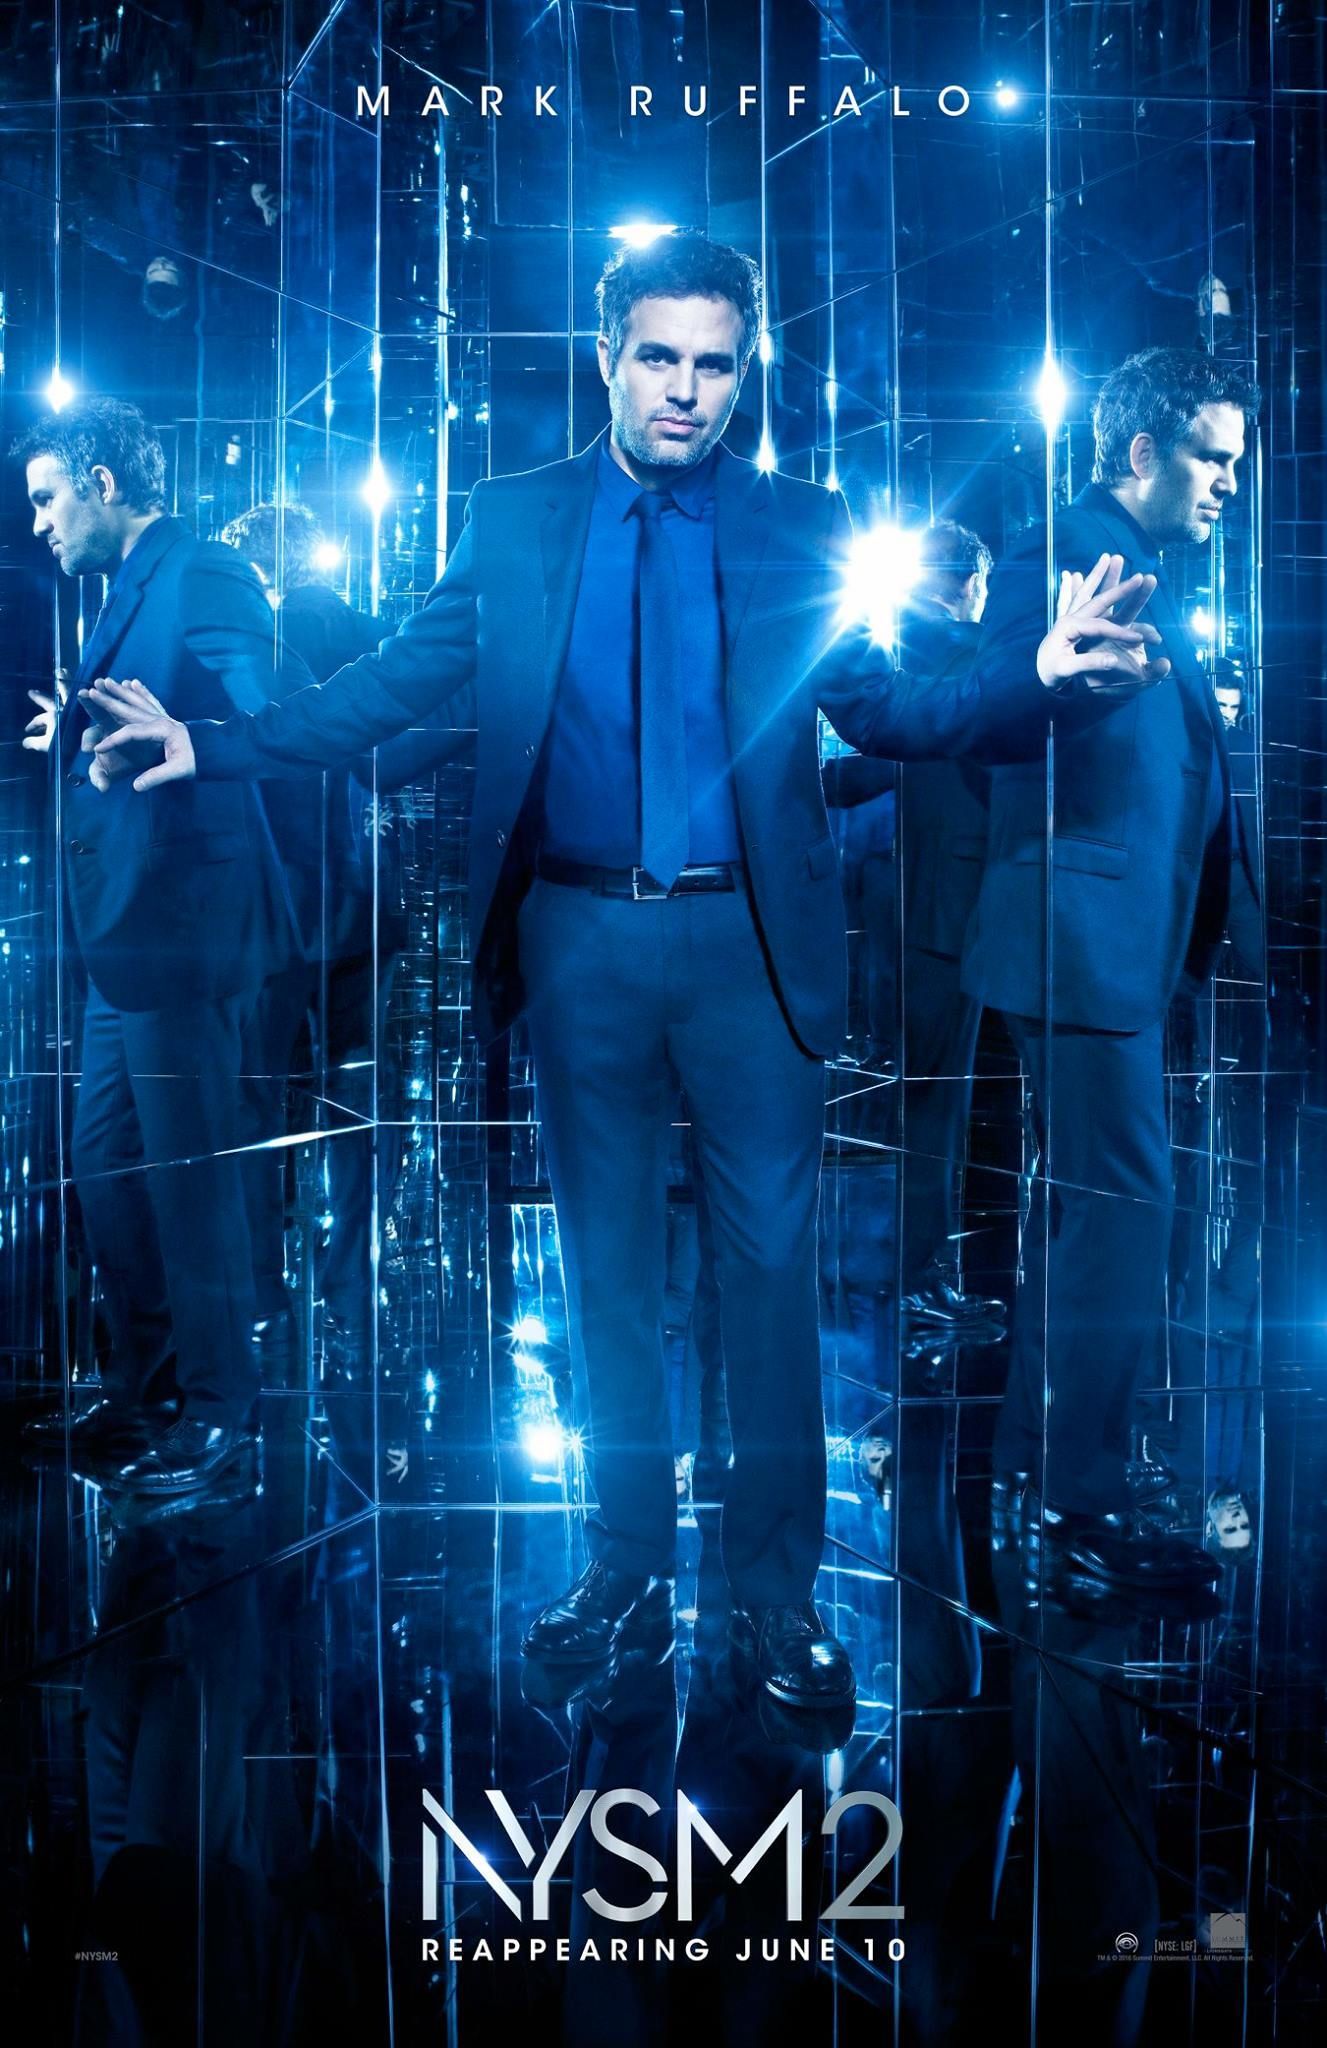 Now You See Me 2 Posters: The Horsemen Are Back